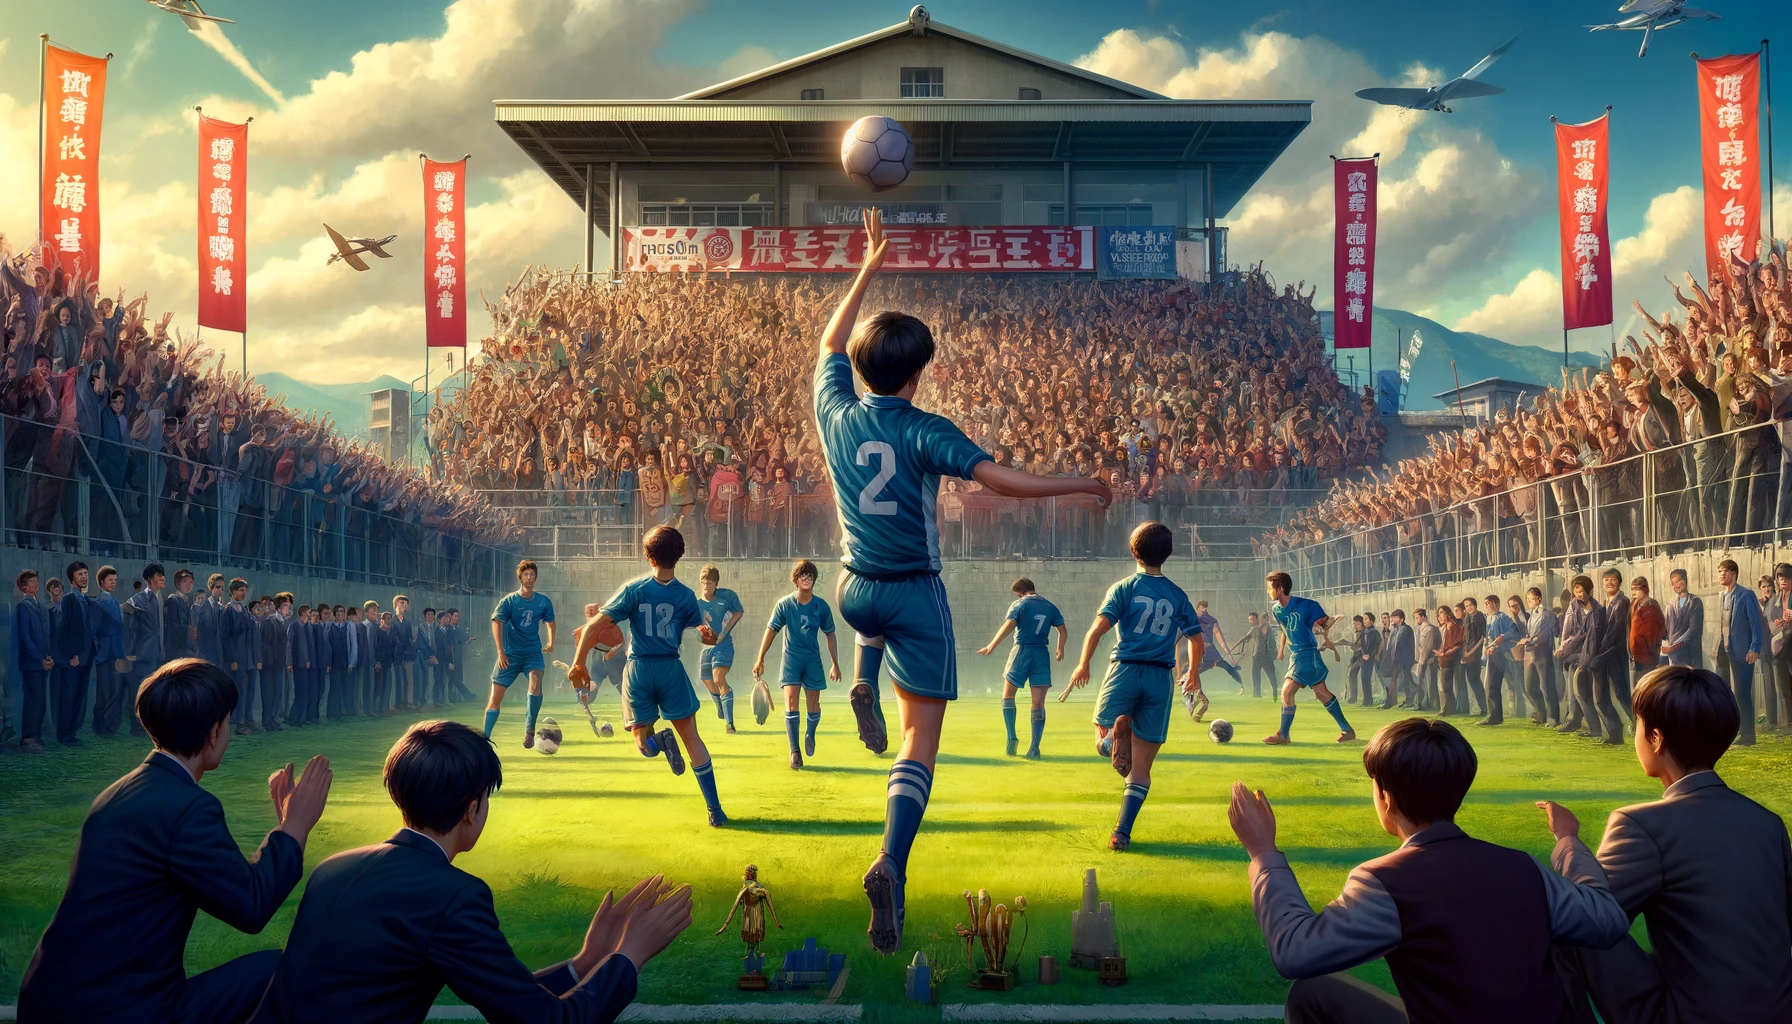 A dynamic scene at Urawai High School in Japan, celebrating its soccer team's frequent championship victories. The image shows the team in action on a well-maintained soccer field, surrounded by enthusiastic spectators in the stands. The players are in vibrant uniforms, executing skilled maneuvers with a soccer ball. The background features banners and trophies symbolizing their repeated successes. The atmosphere is electrifying, with students, teachers, and fans cheering, some waving flags or school banners, all under a clear blue sky. This captures the spirit and pride of a consistently winning soccer program at the school.